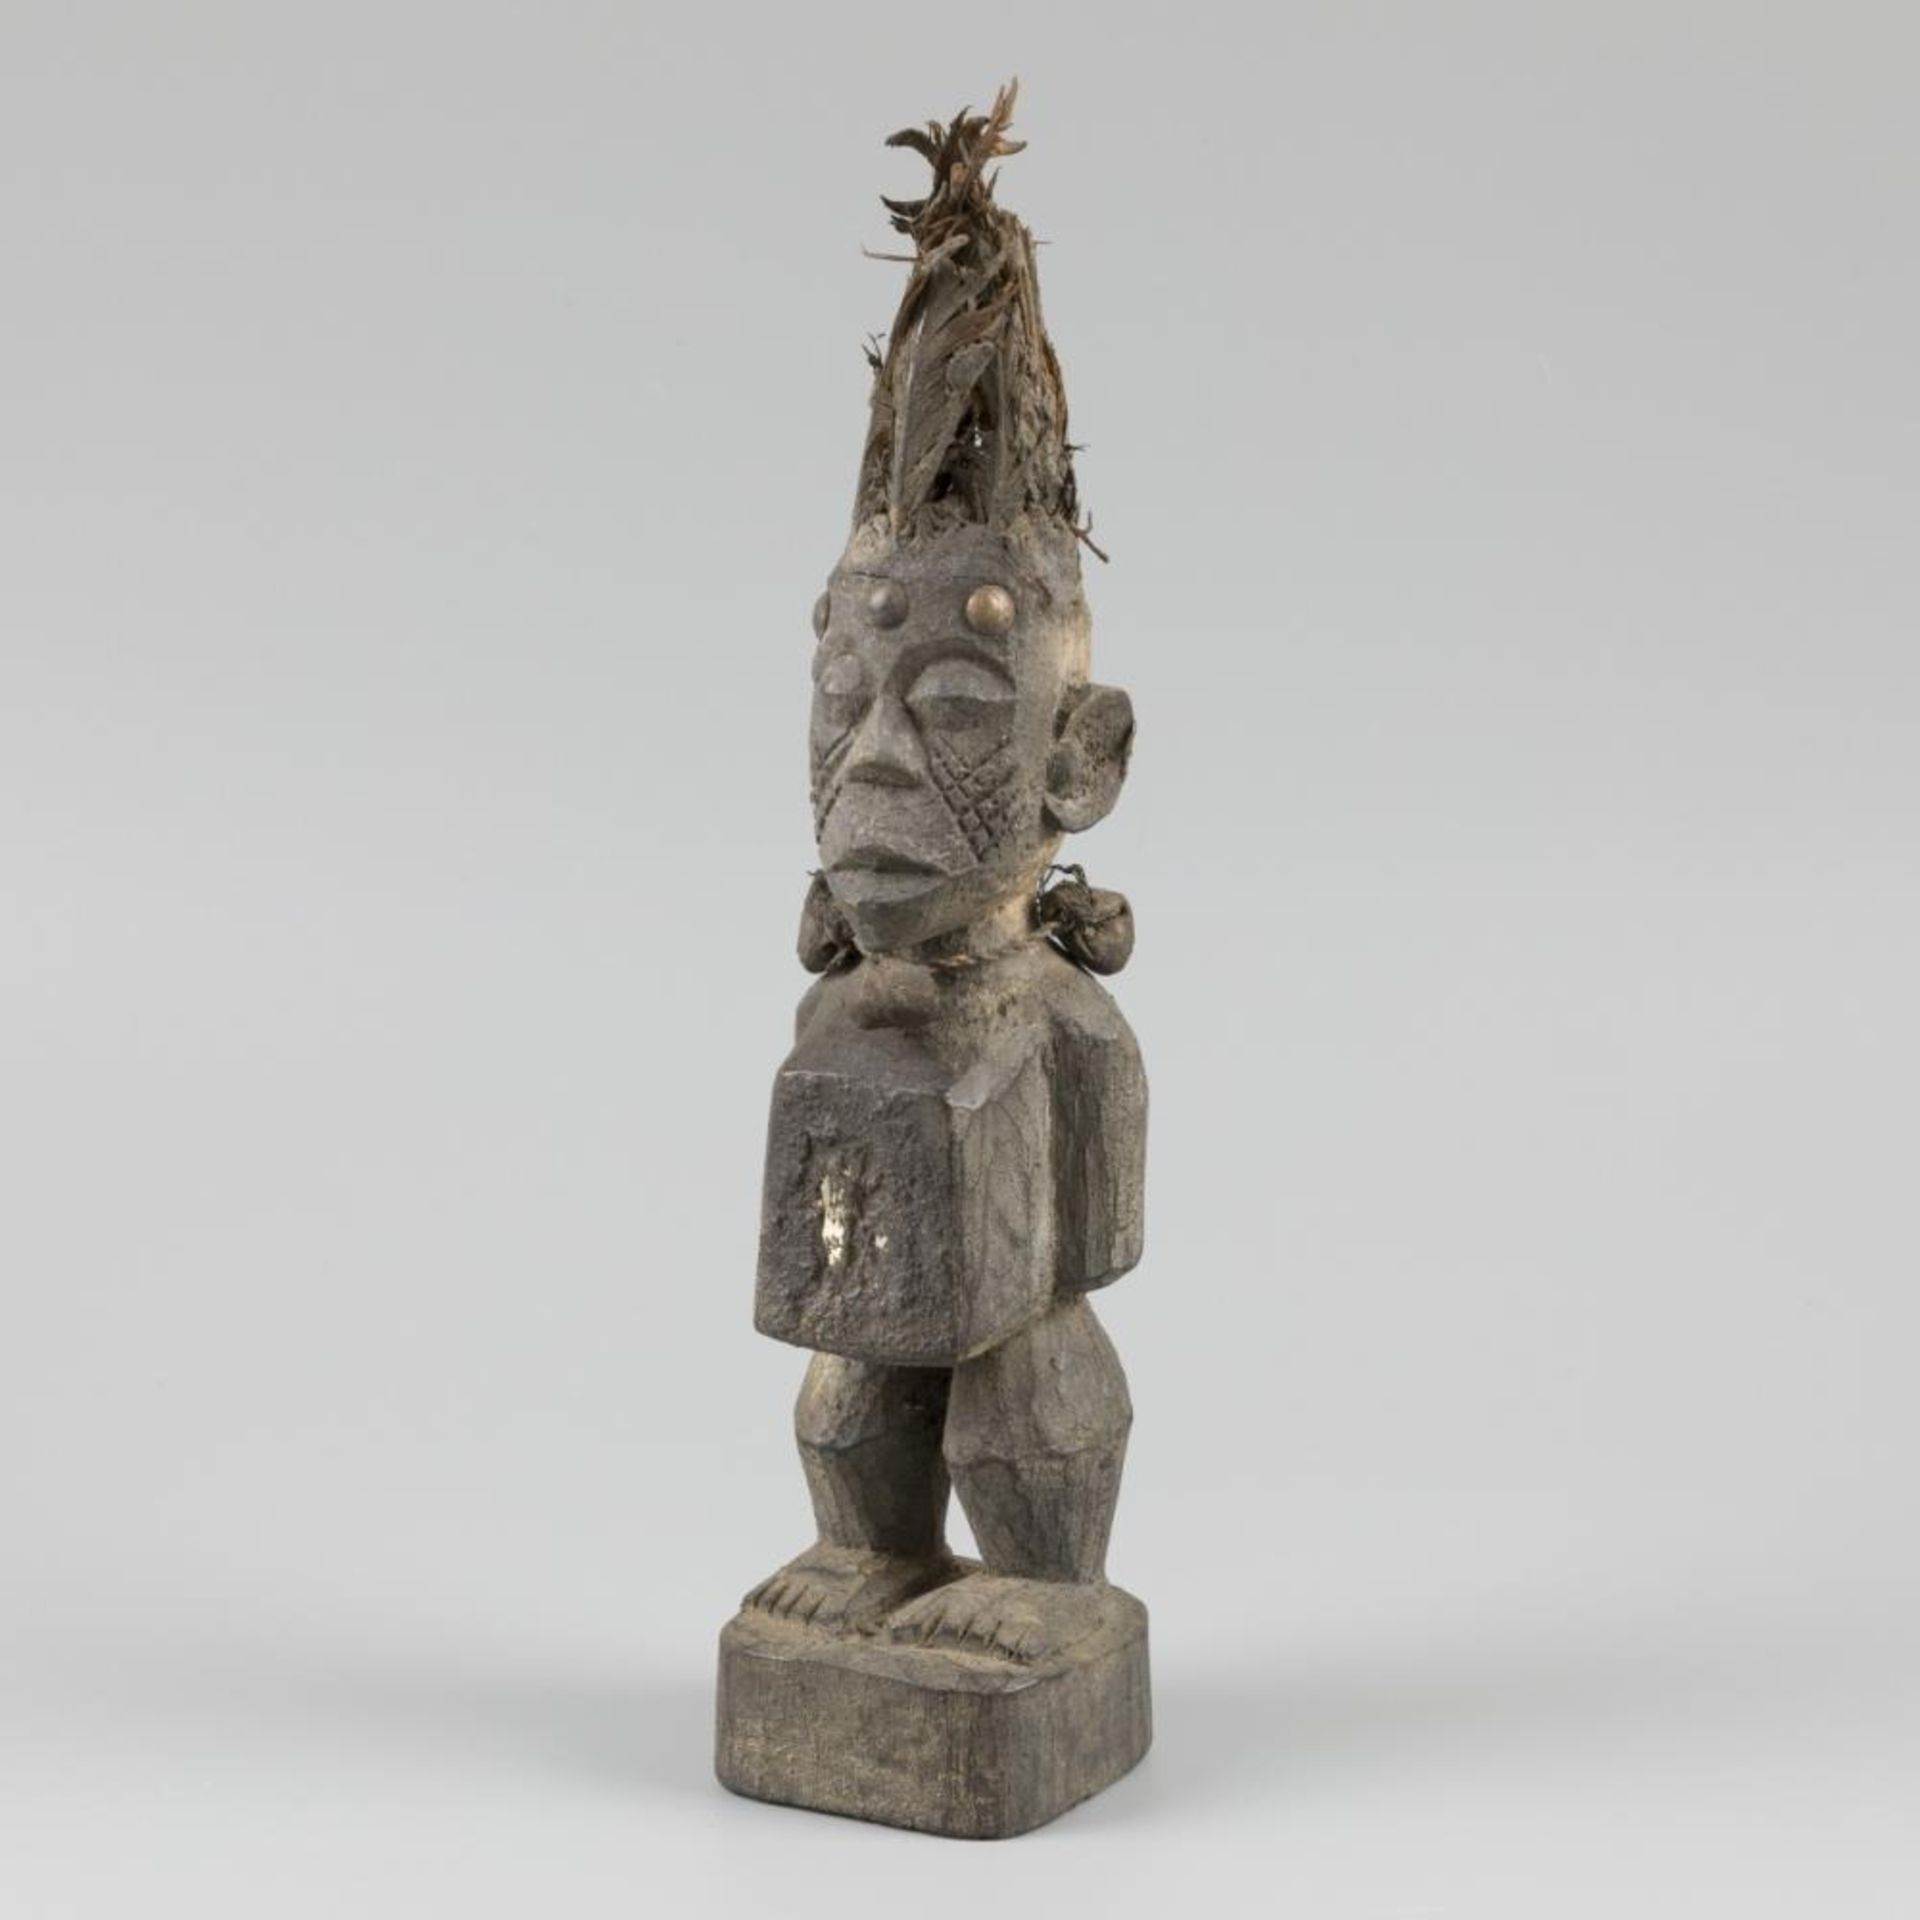 A Songye fetish statue, West Africa, mid. 20th century.